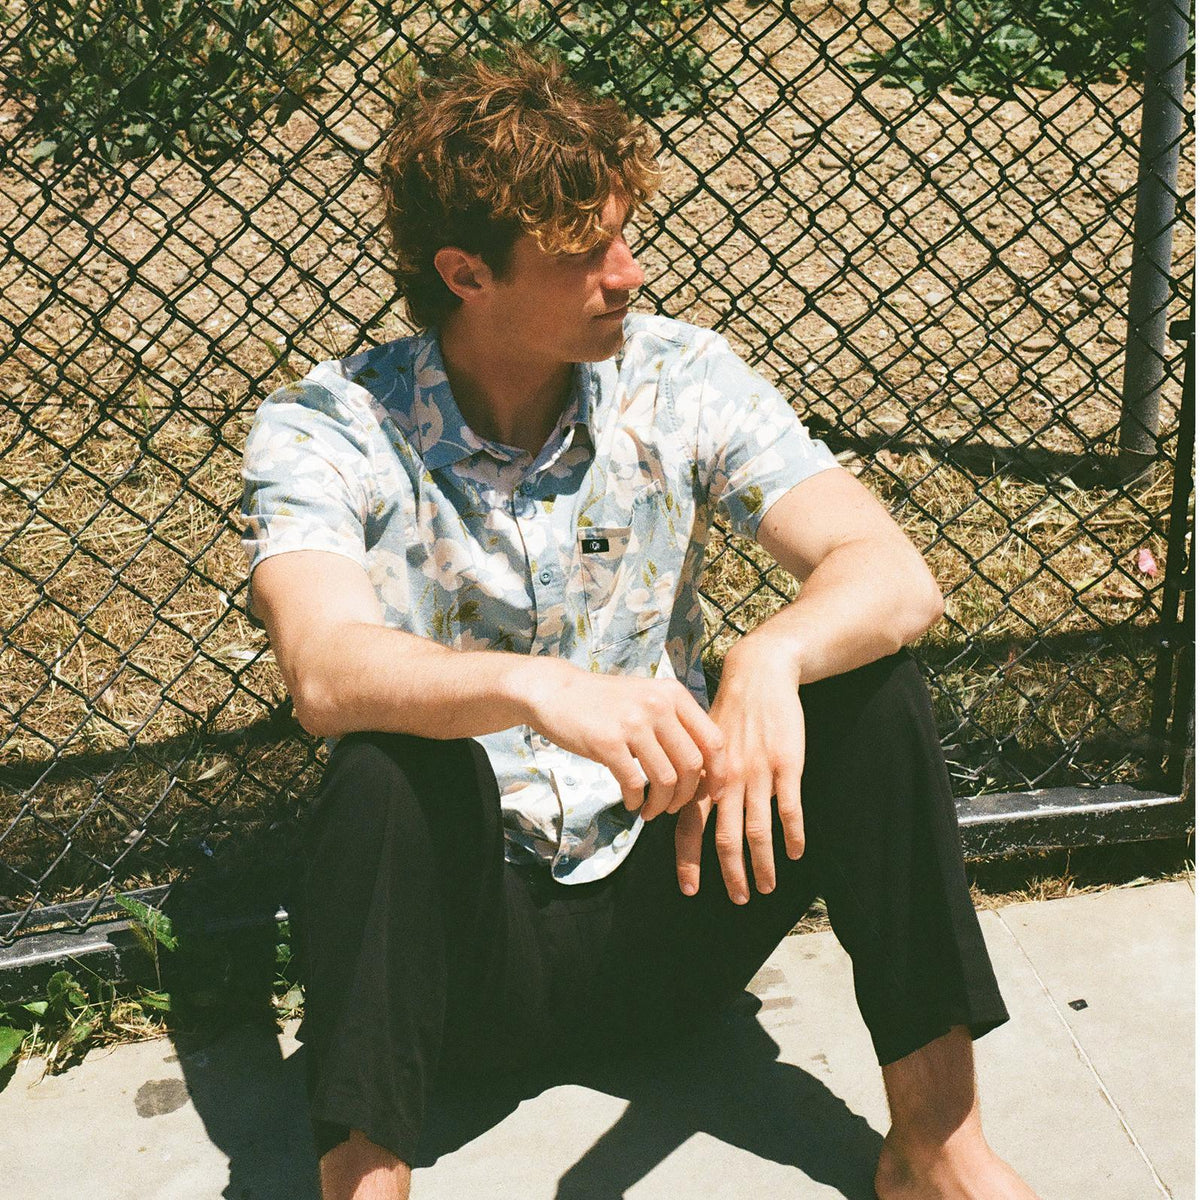 A man wearing a light blue short sleeve floral button-down shirt, sitting relaxed against a chain-link fence. The shirt features a vibrant floral pattern in shades of white and pink. The man&#39;s posture suggests comfort and relaxation as he leans casually against the fence. 